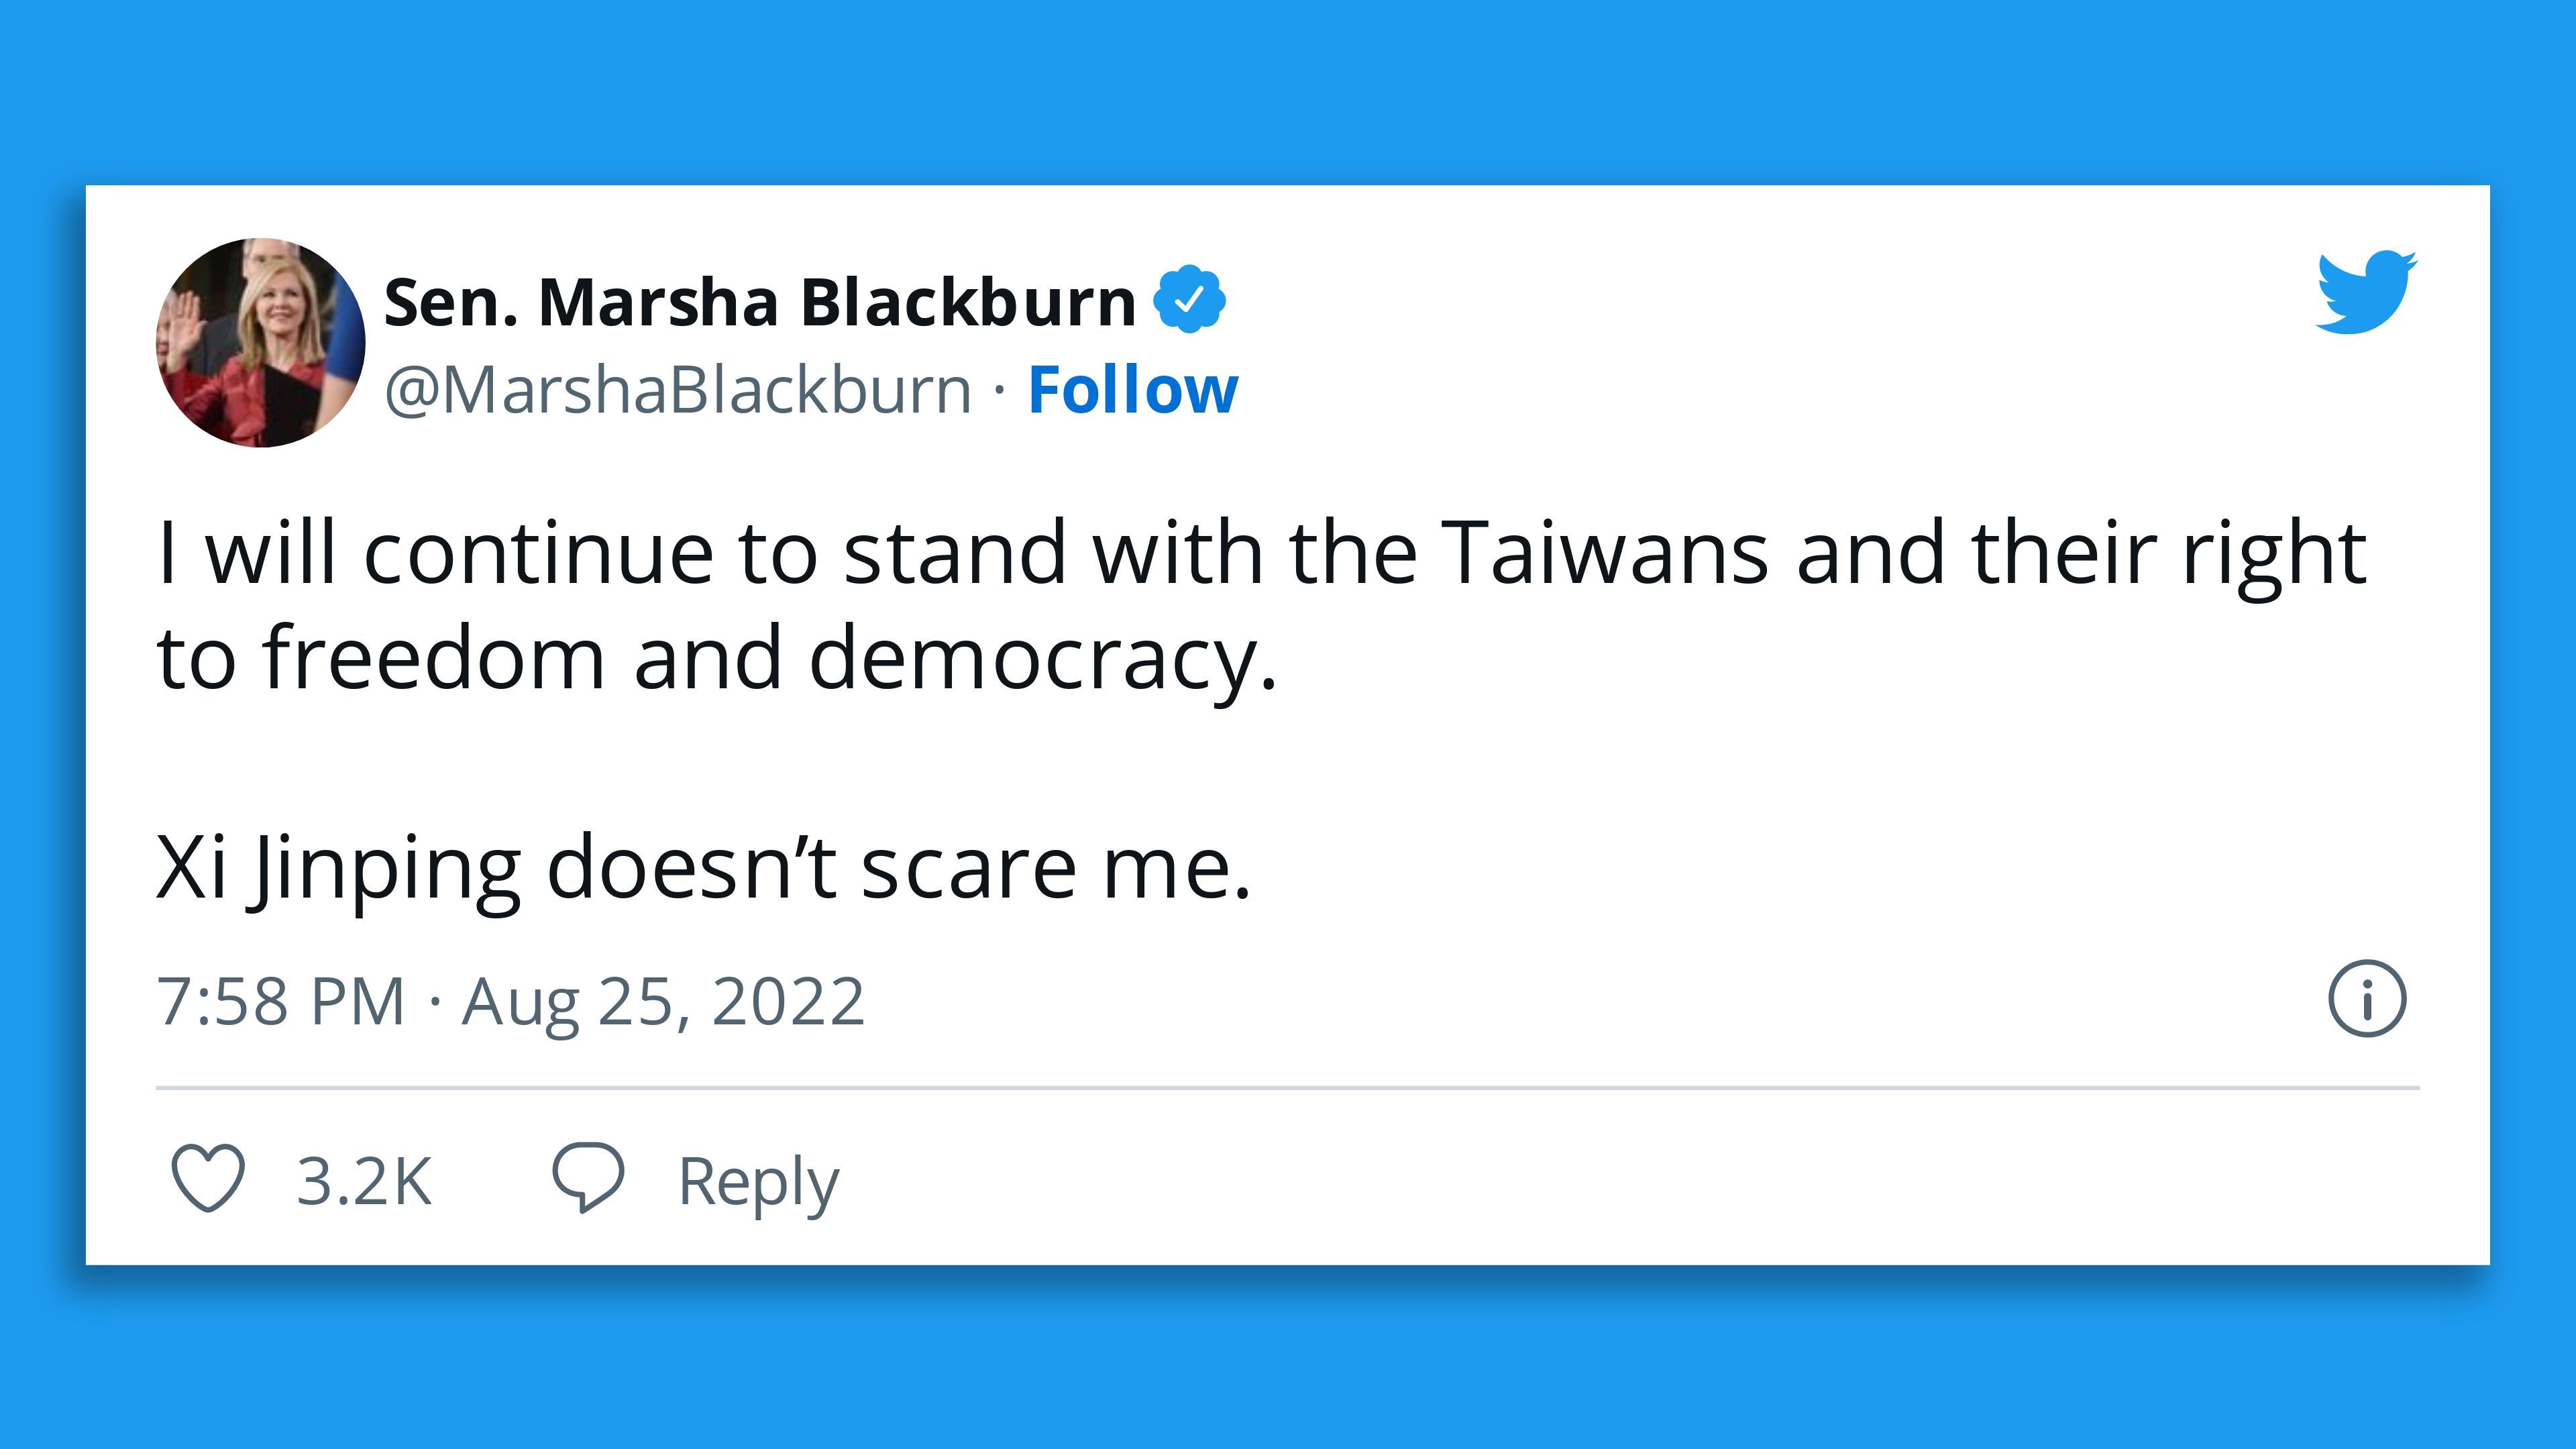 A screenshot of a tweet by Sen. Marsha Blackburn in which she says she stands with Taiwan and Chinese President Xi Jing Ping "doesn't scare me."